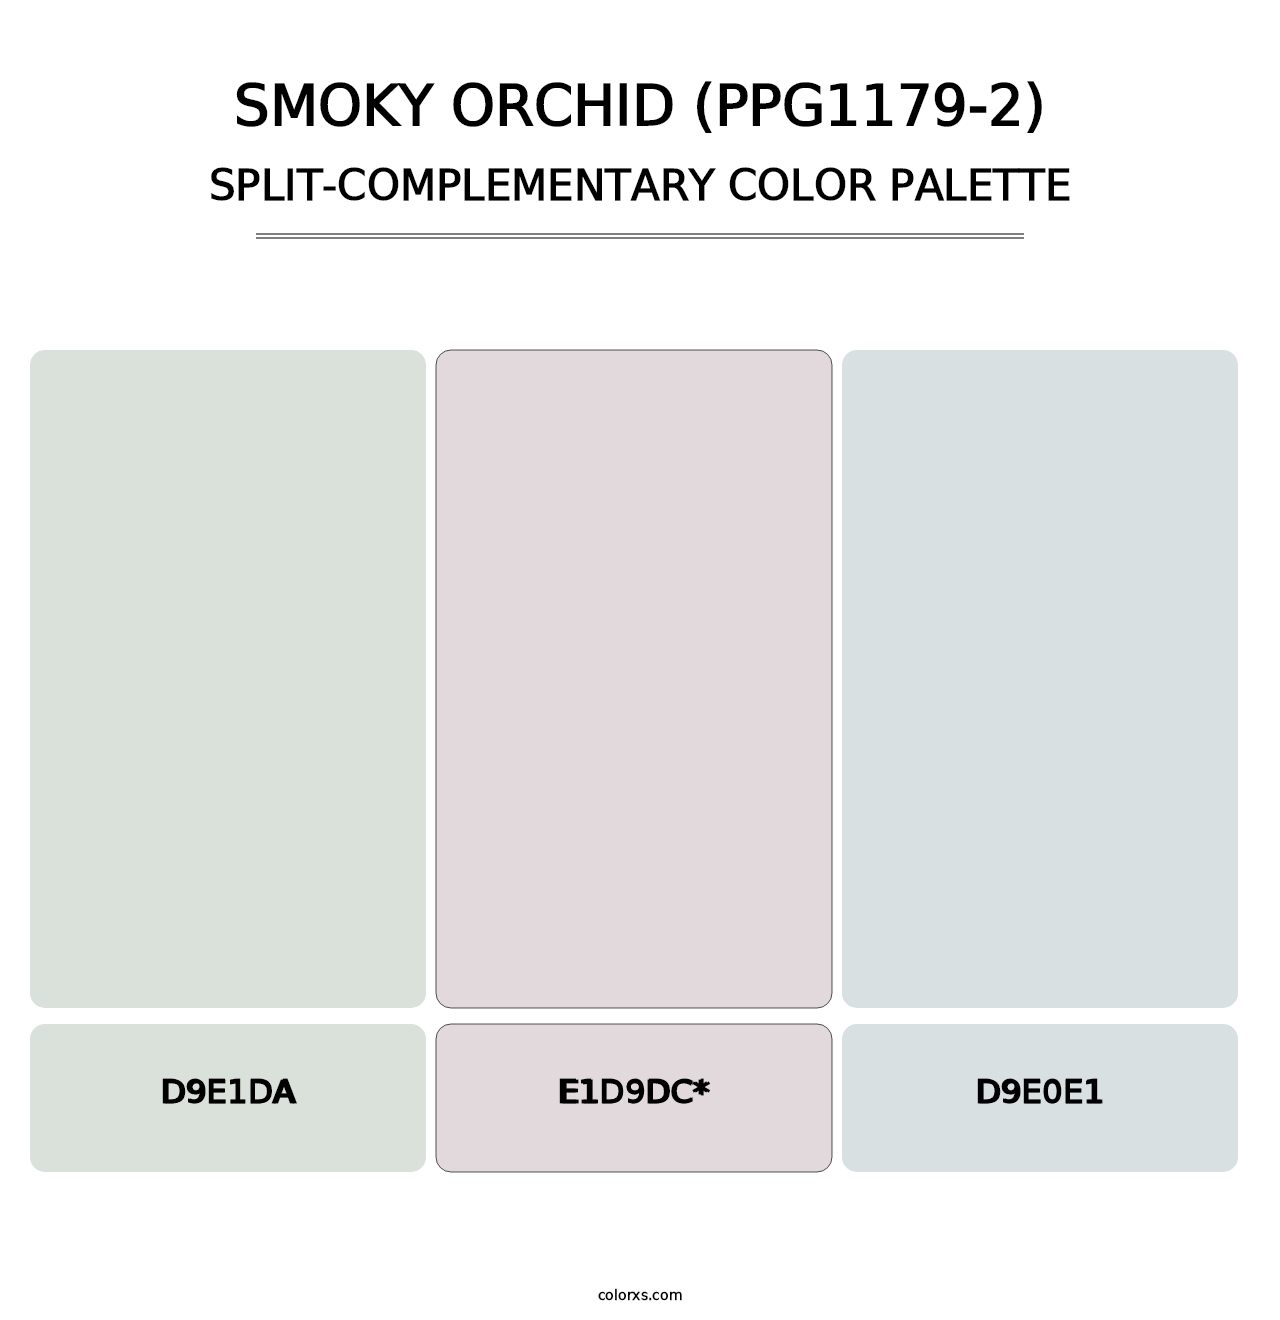 Smoky Orchid (PPG1179-2) - Split-Complementary Color Palette